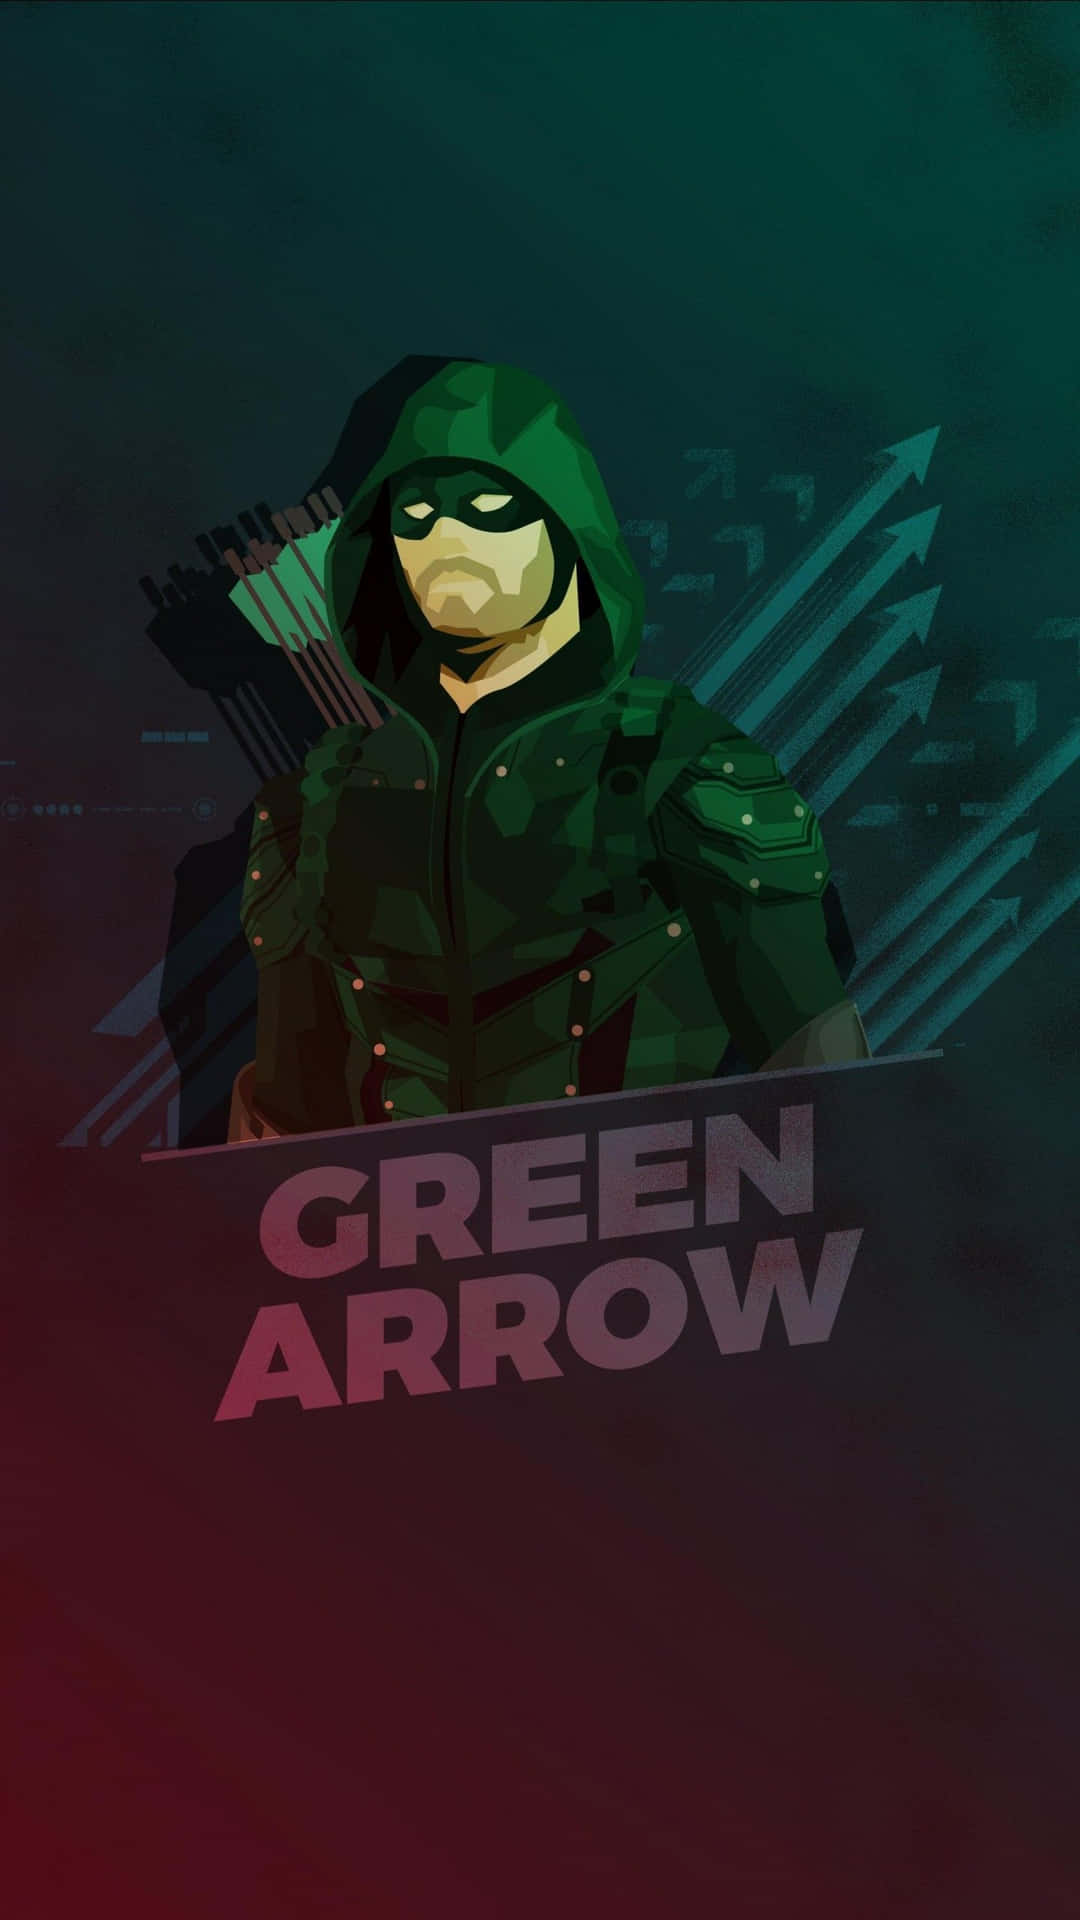 Get Your Hands On The Latest Green Arrow Iphone Wallpaper